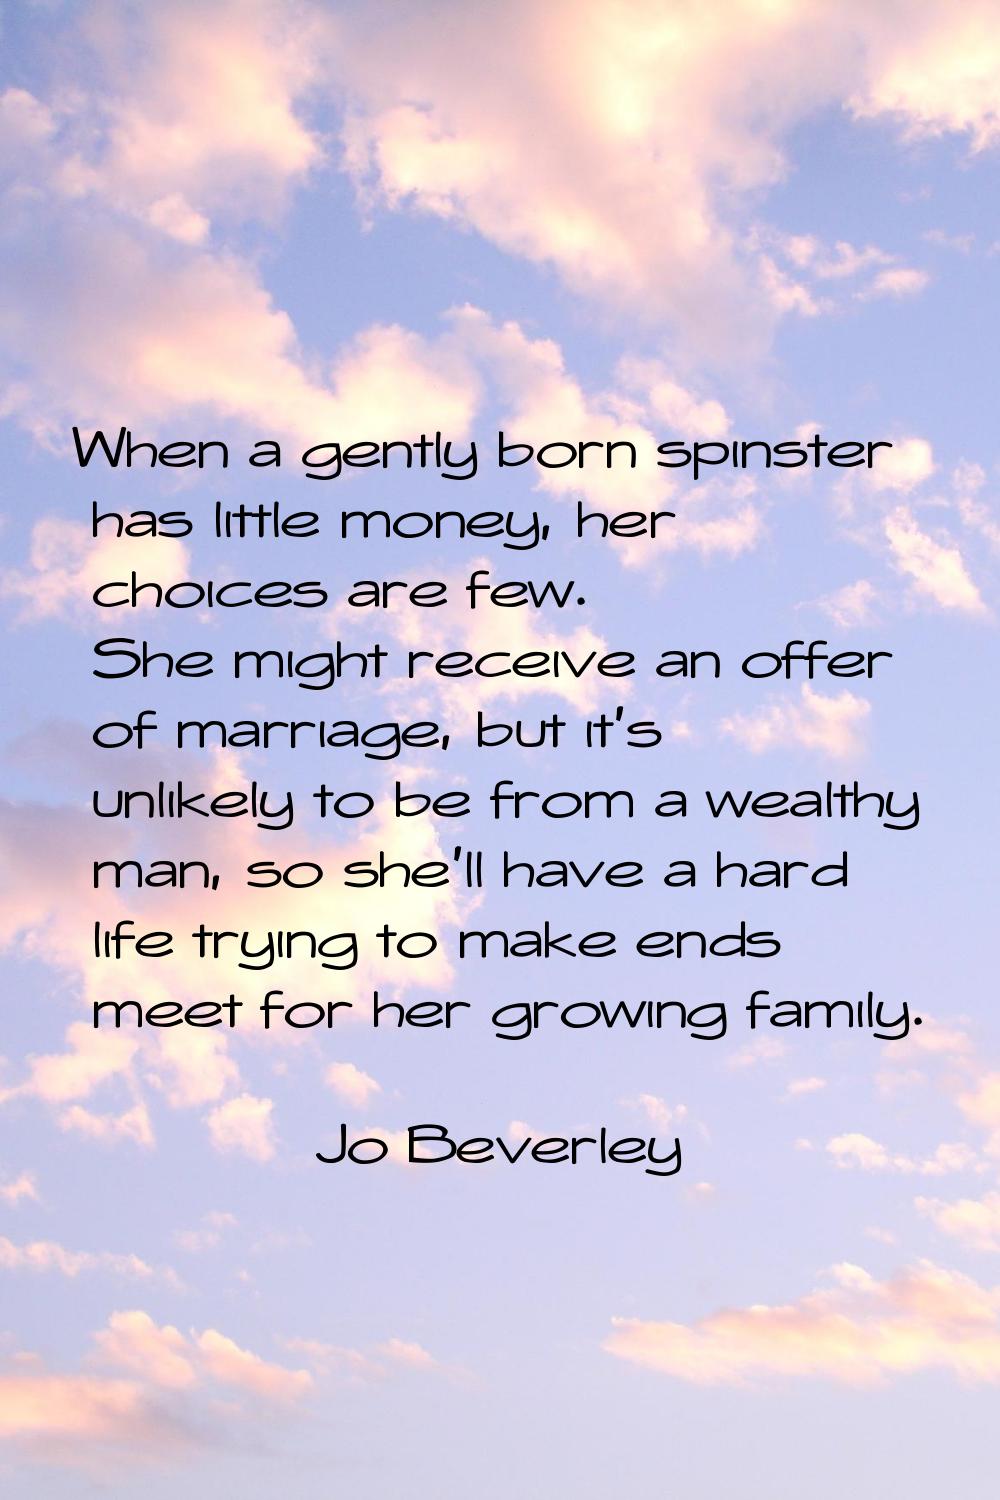 When a gently born spinster has little money, her choices are few. She might receive an offer of ma